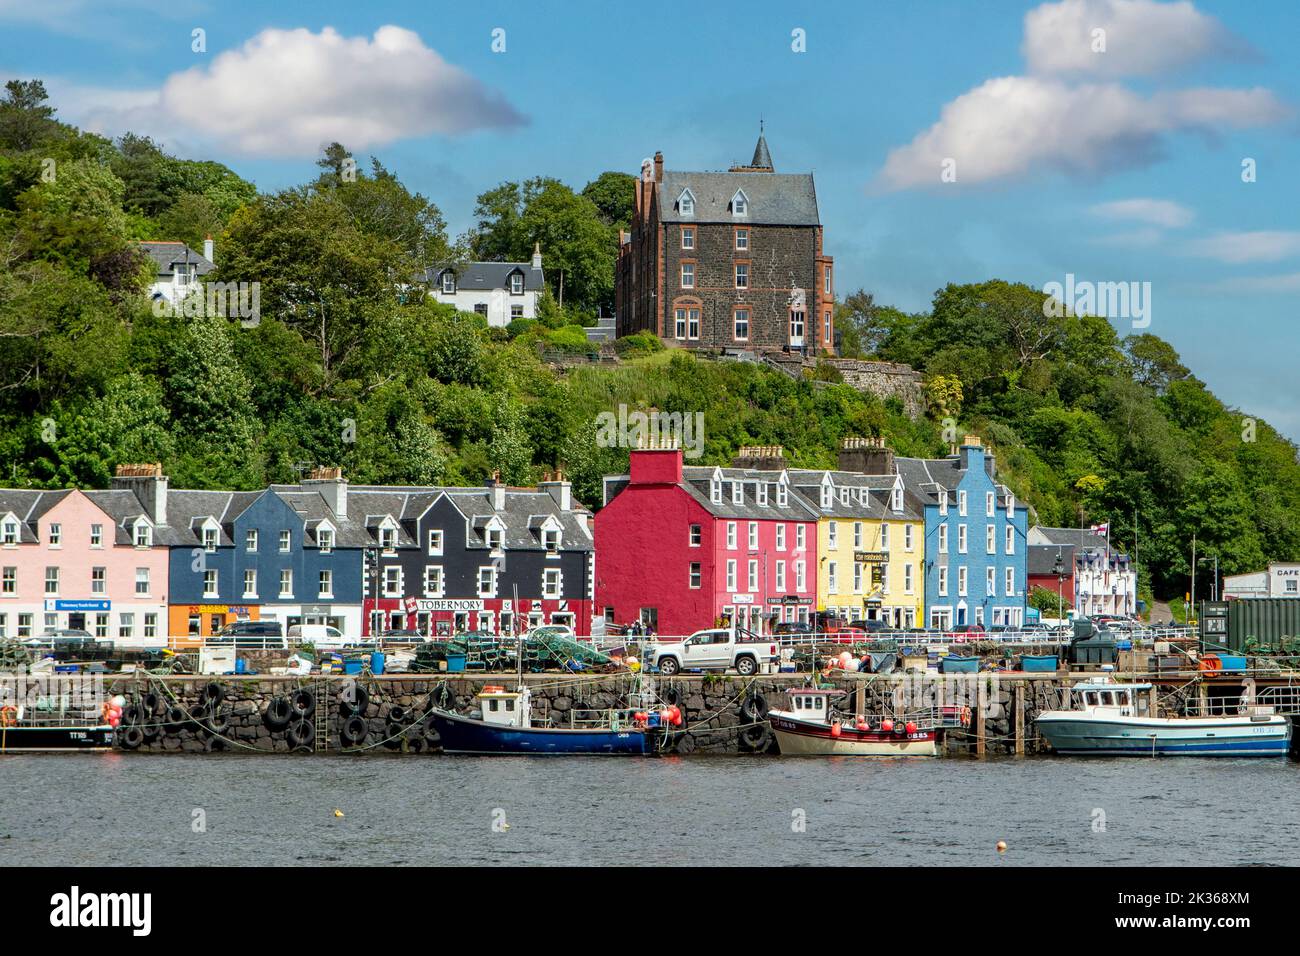 Waterfront Housing, Tobermory, Mull, Argyll et Bute, Écosse Banque D'Images